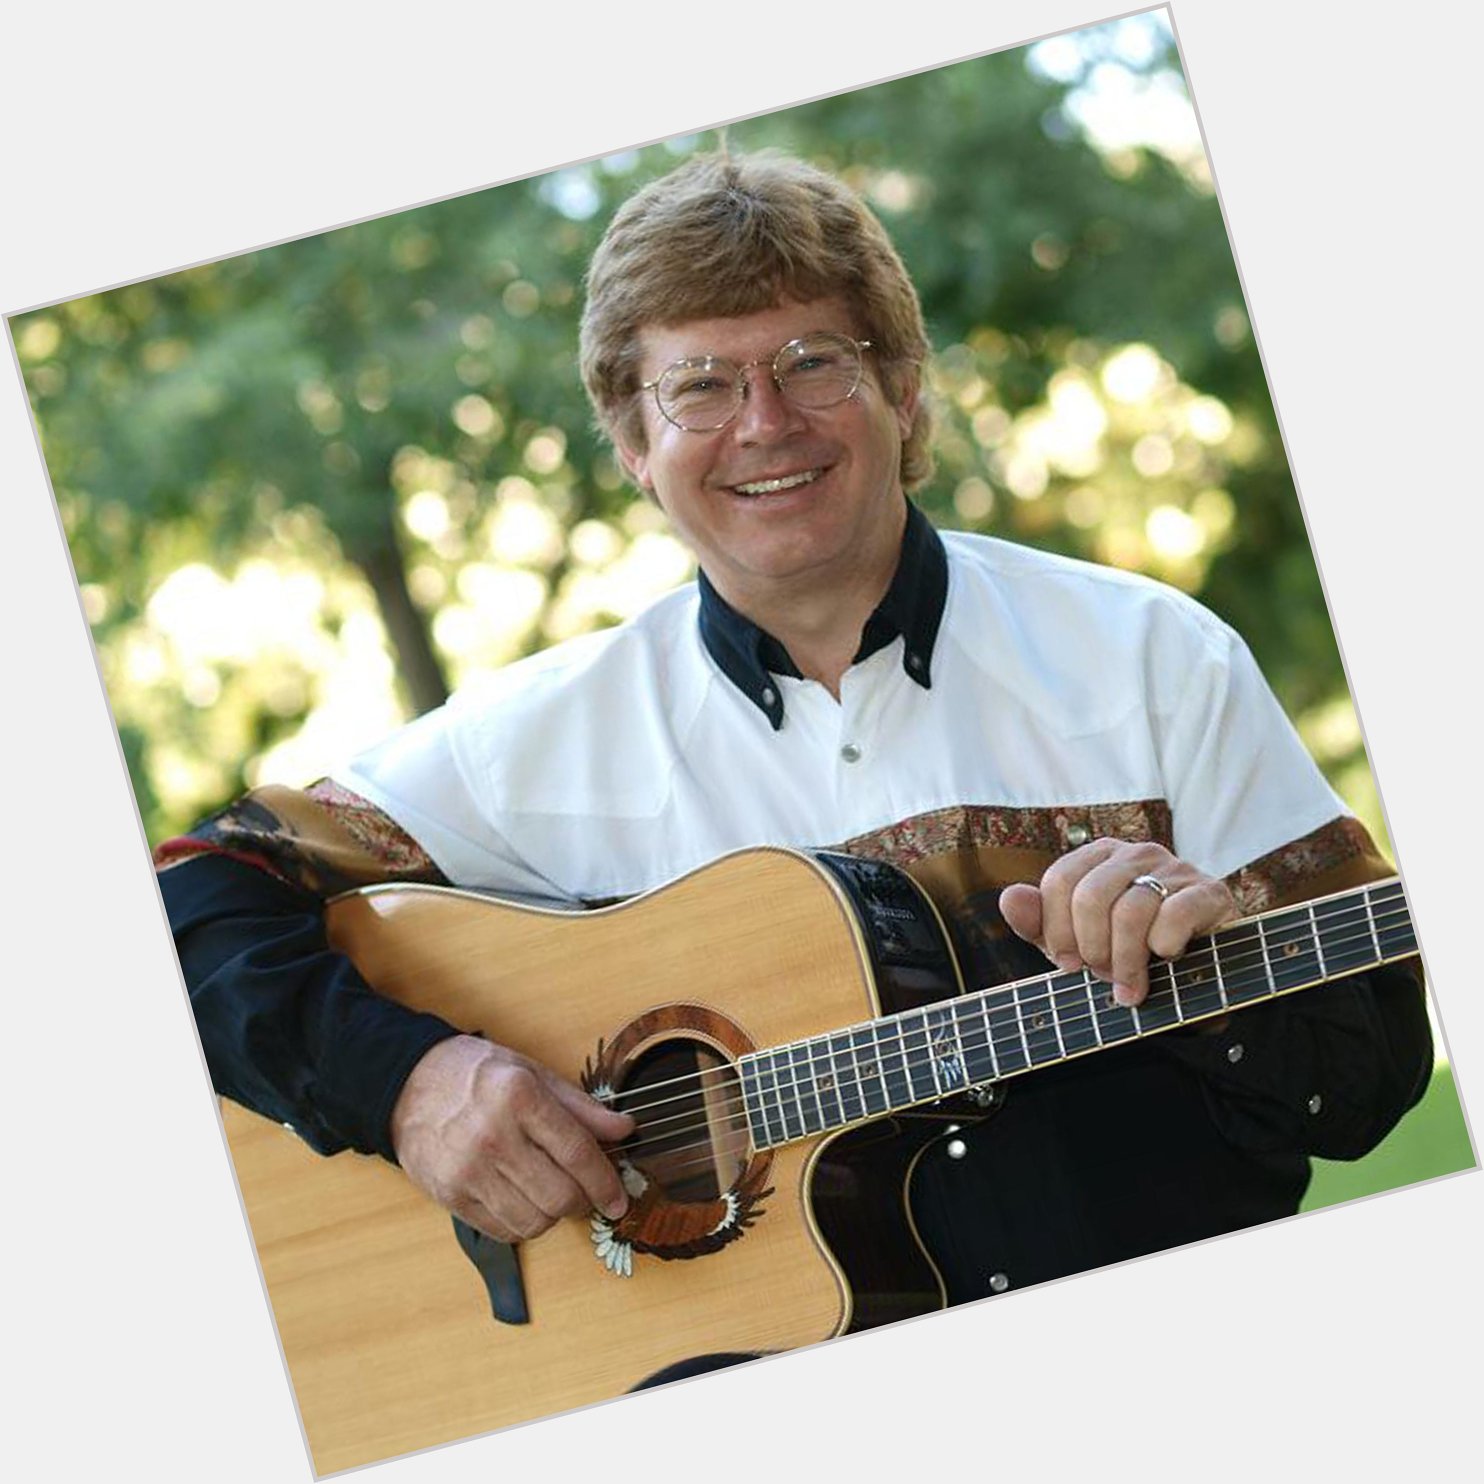 Many Happy Returns
Look who you share your BIRTHDAY with..

John Denver - Born on this day in 1943, died in 1997. 